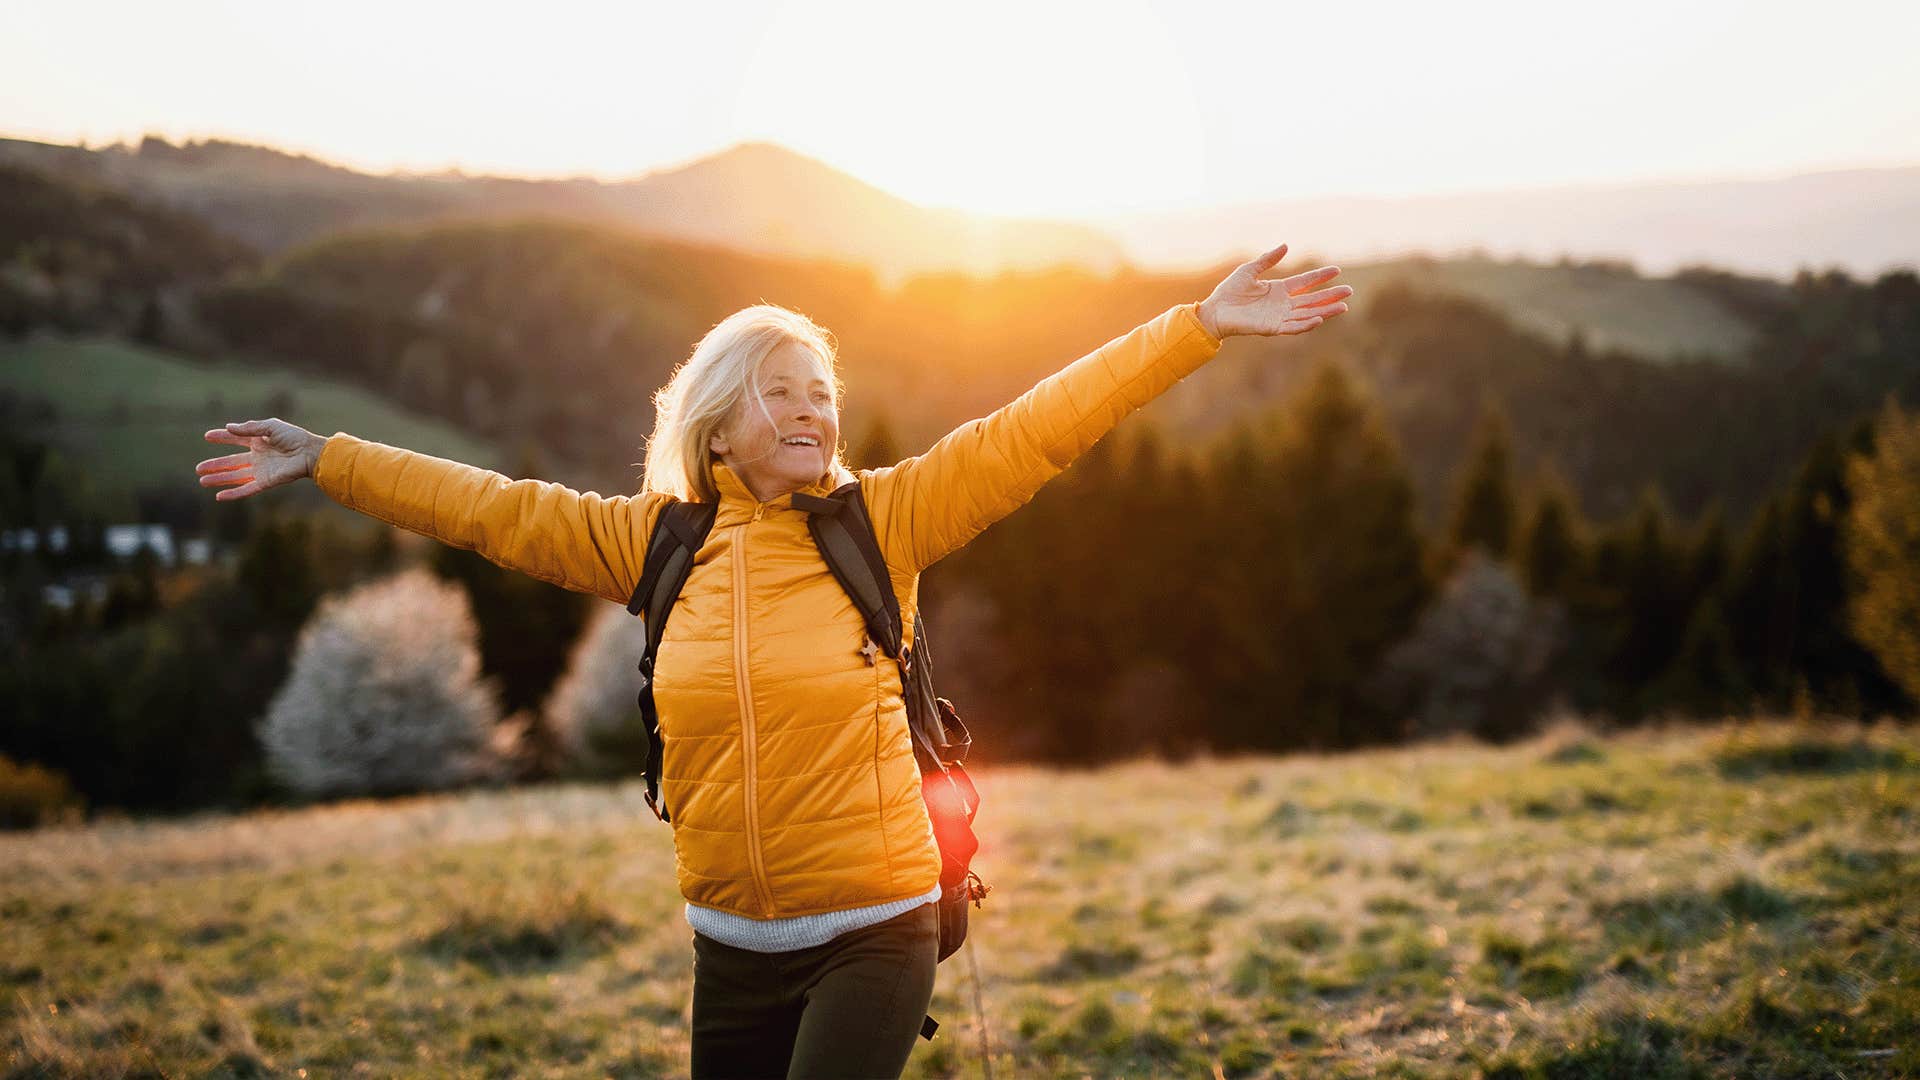 Older woman hiking a mountain in a yellow jacket